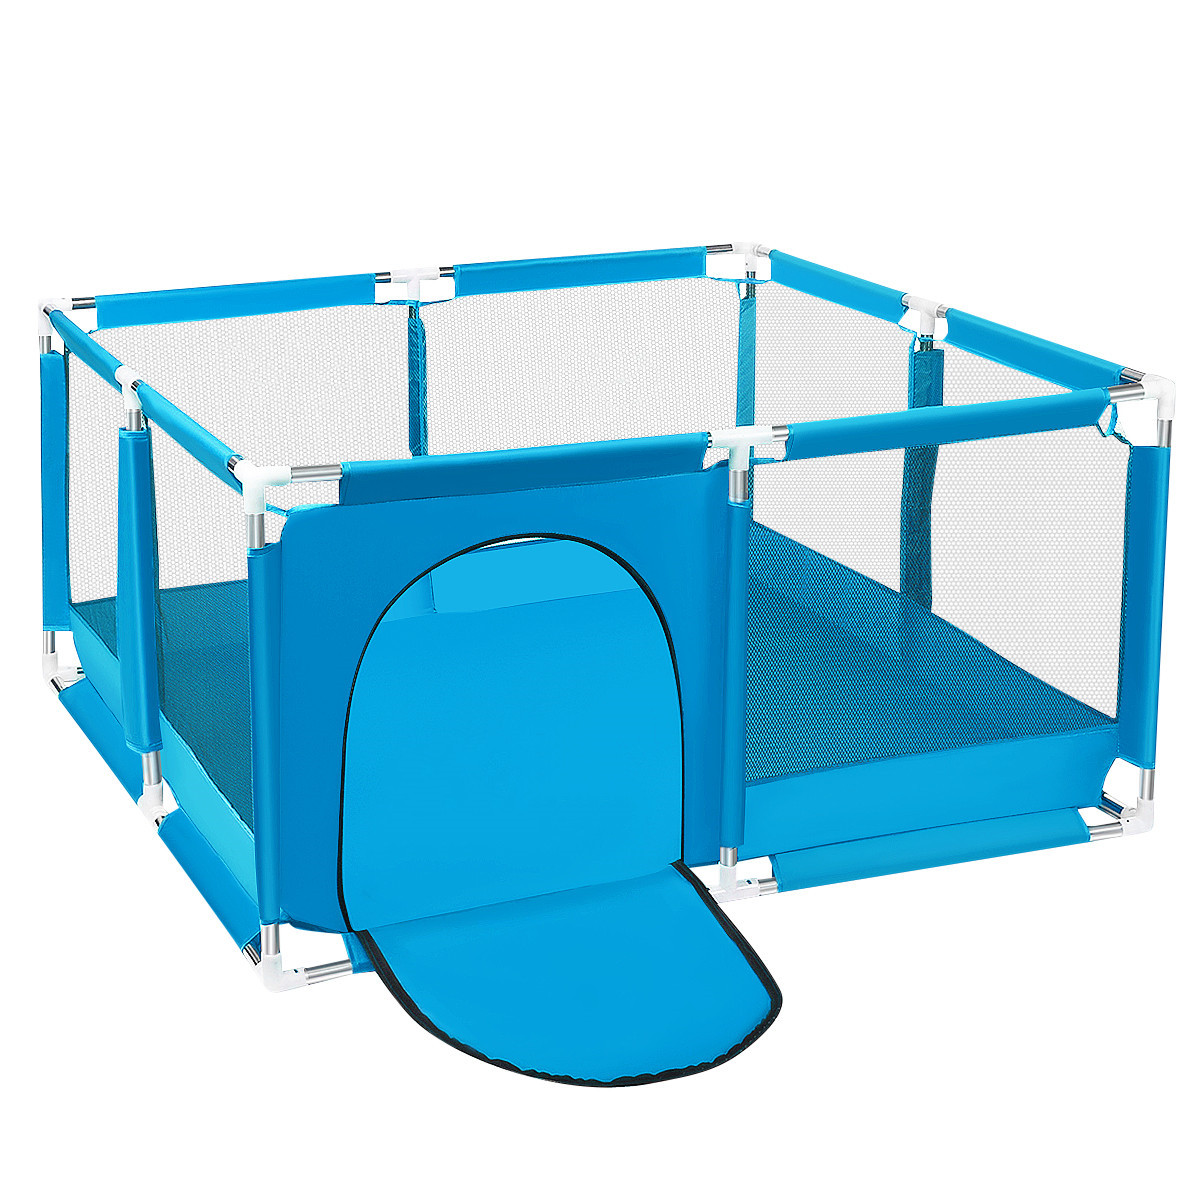 Baby Playpen,Outdoor Play Yard,Portable 4-Panel Baby Safety Playpen for Infant Toddler,Blue - image 1 of 5